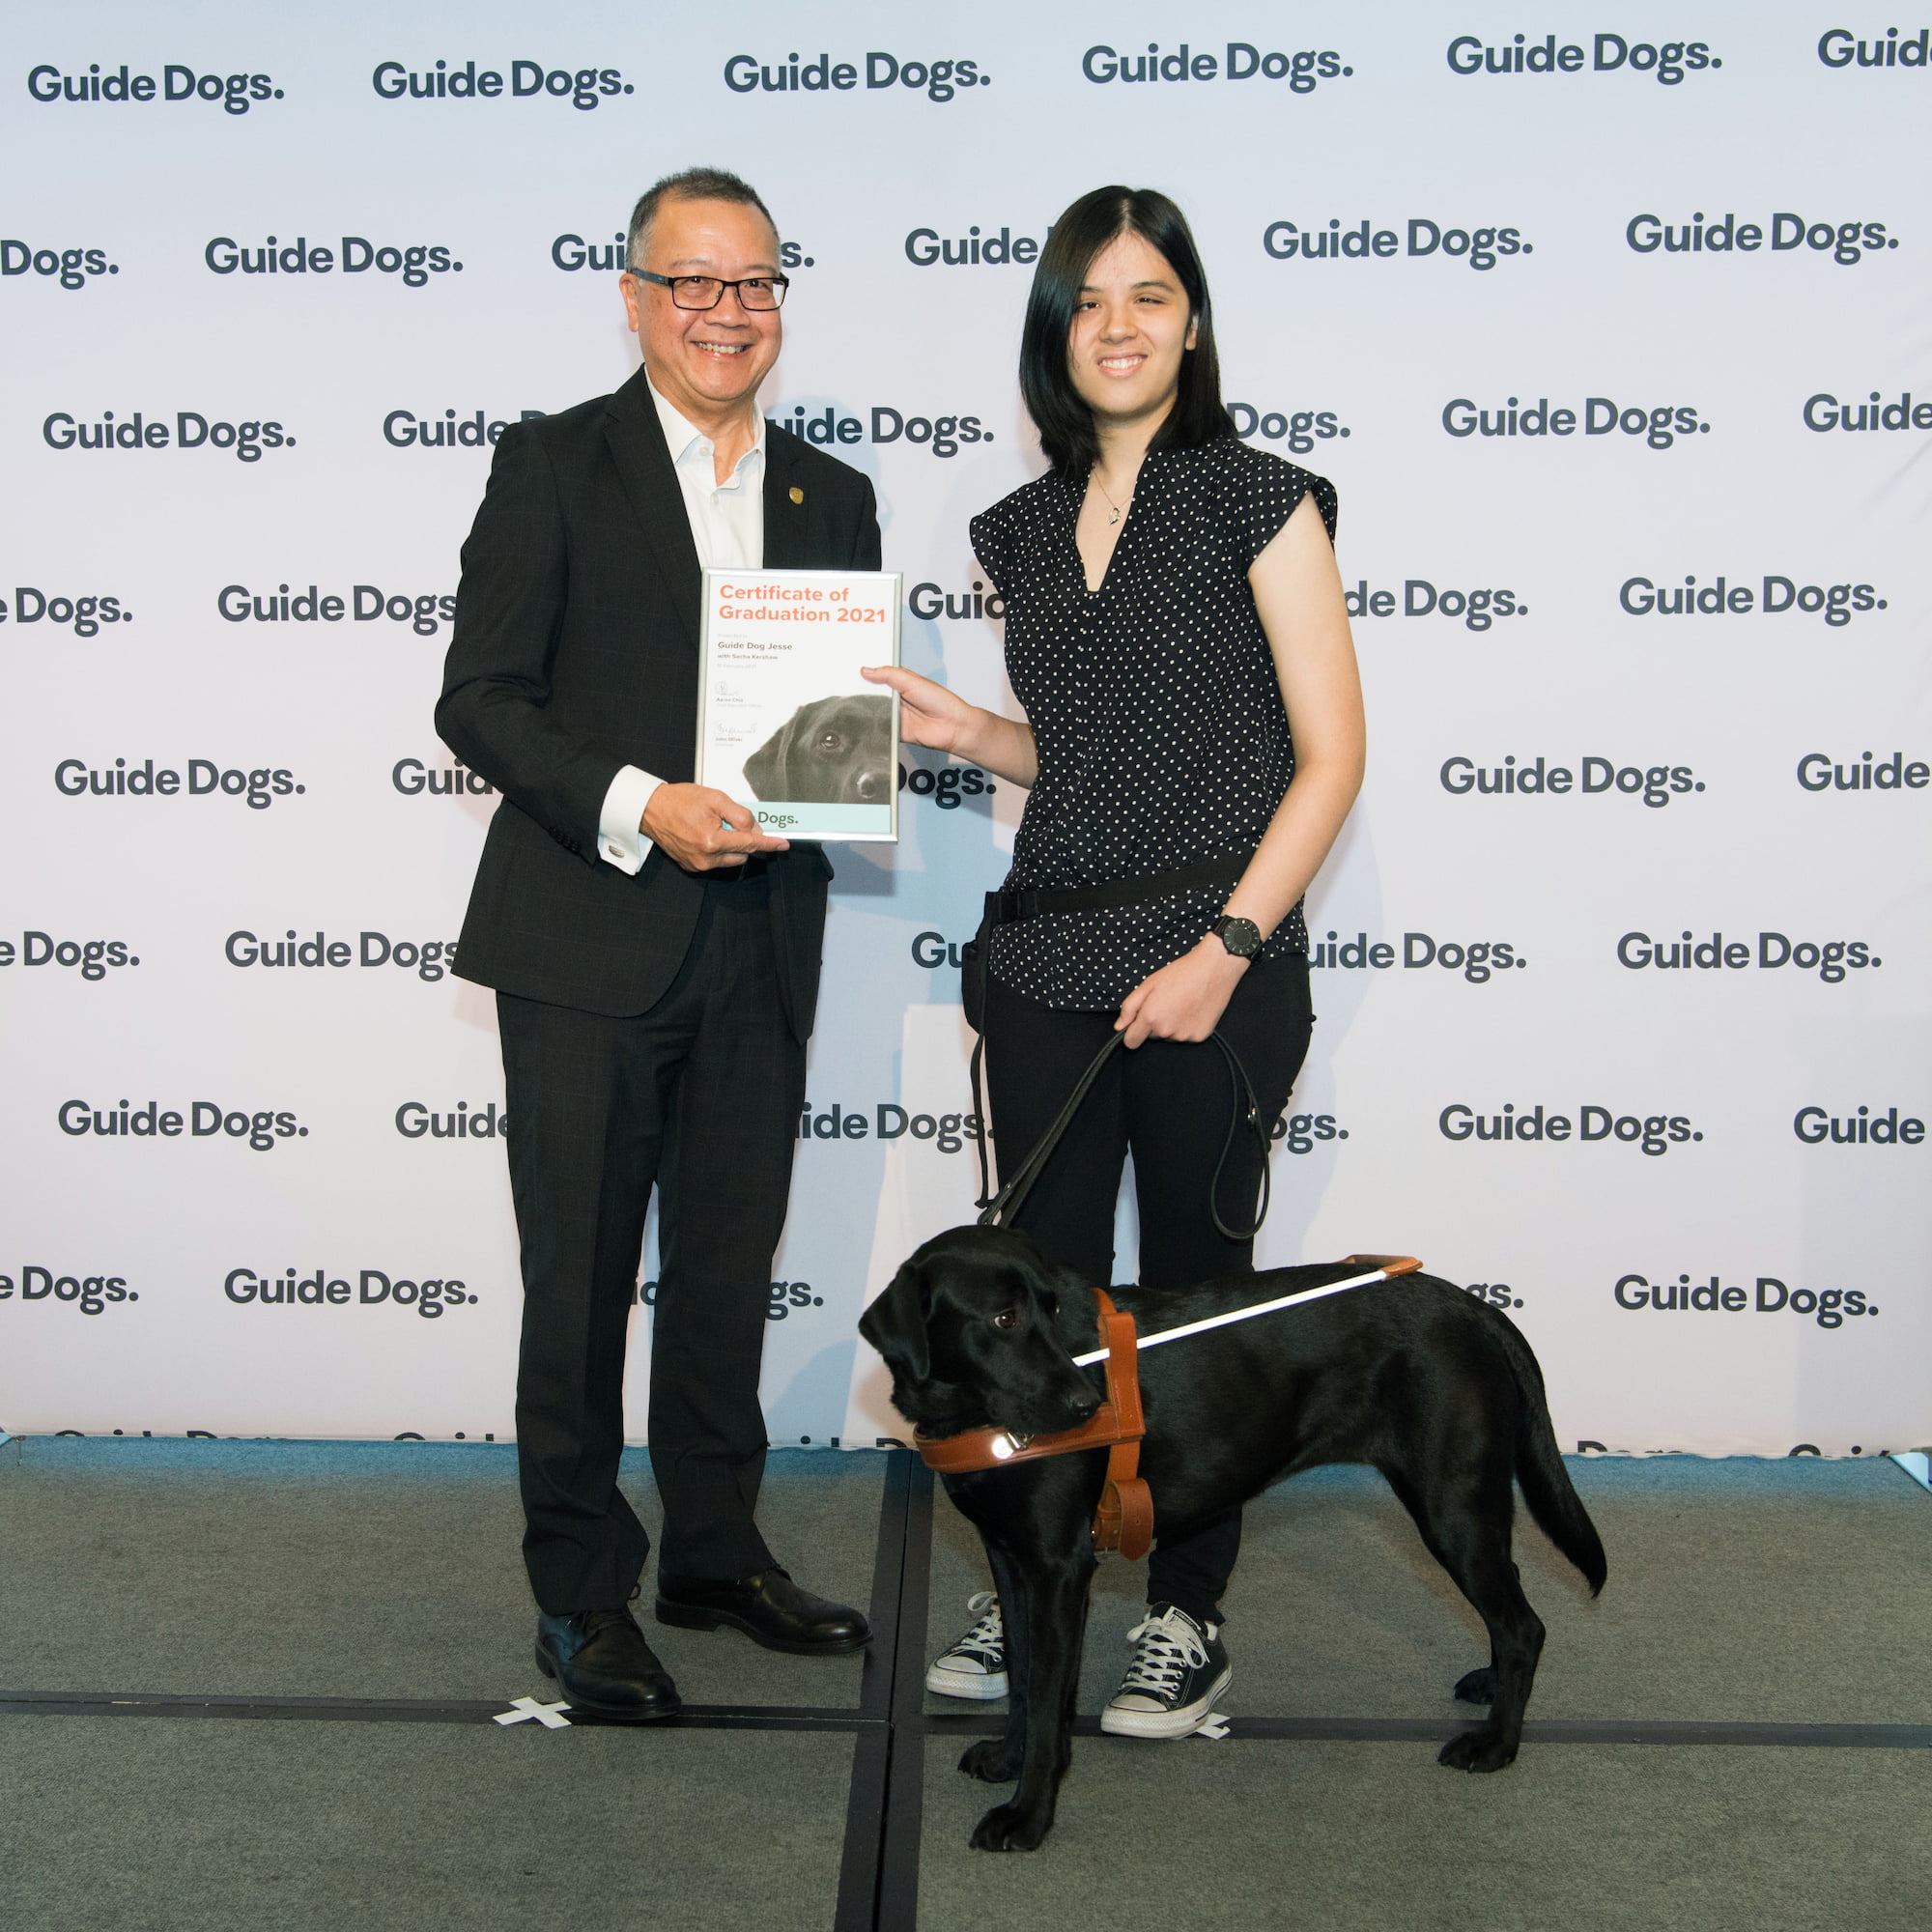 Guide Dogs SA/NT CEO Aaron Chia standing on stage with Guide Dogs Client Sacha and her Guide Dog Jesse, a black Labrador who is wearing a harness. Aaron is presenting Sacha with a certificate.